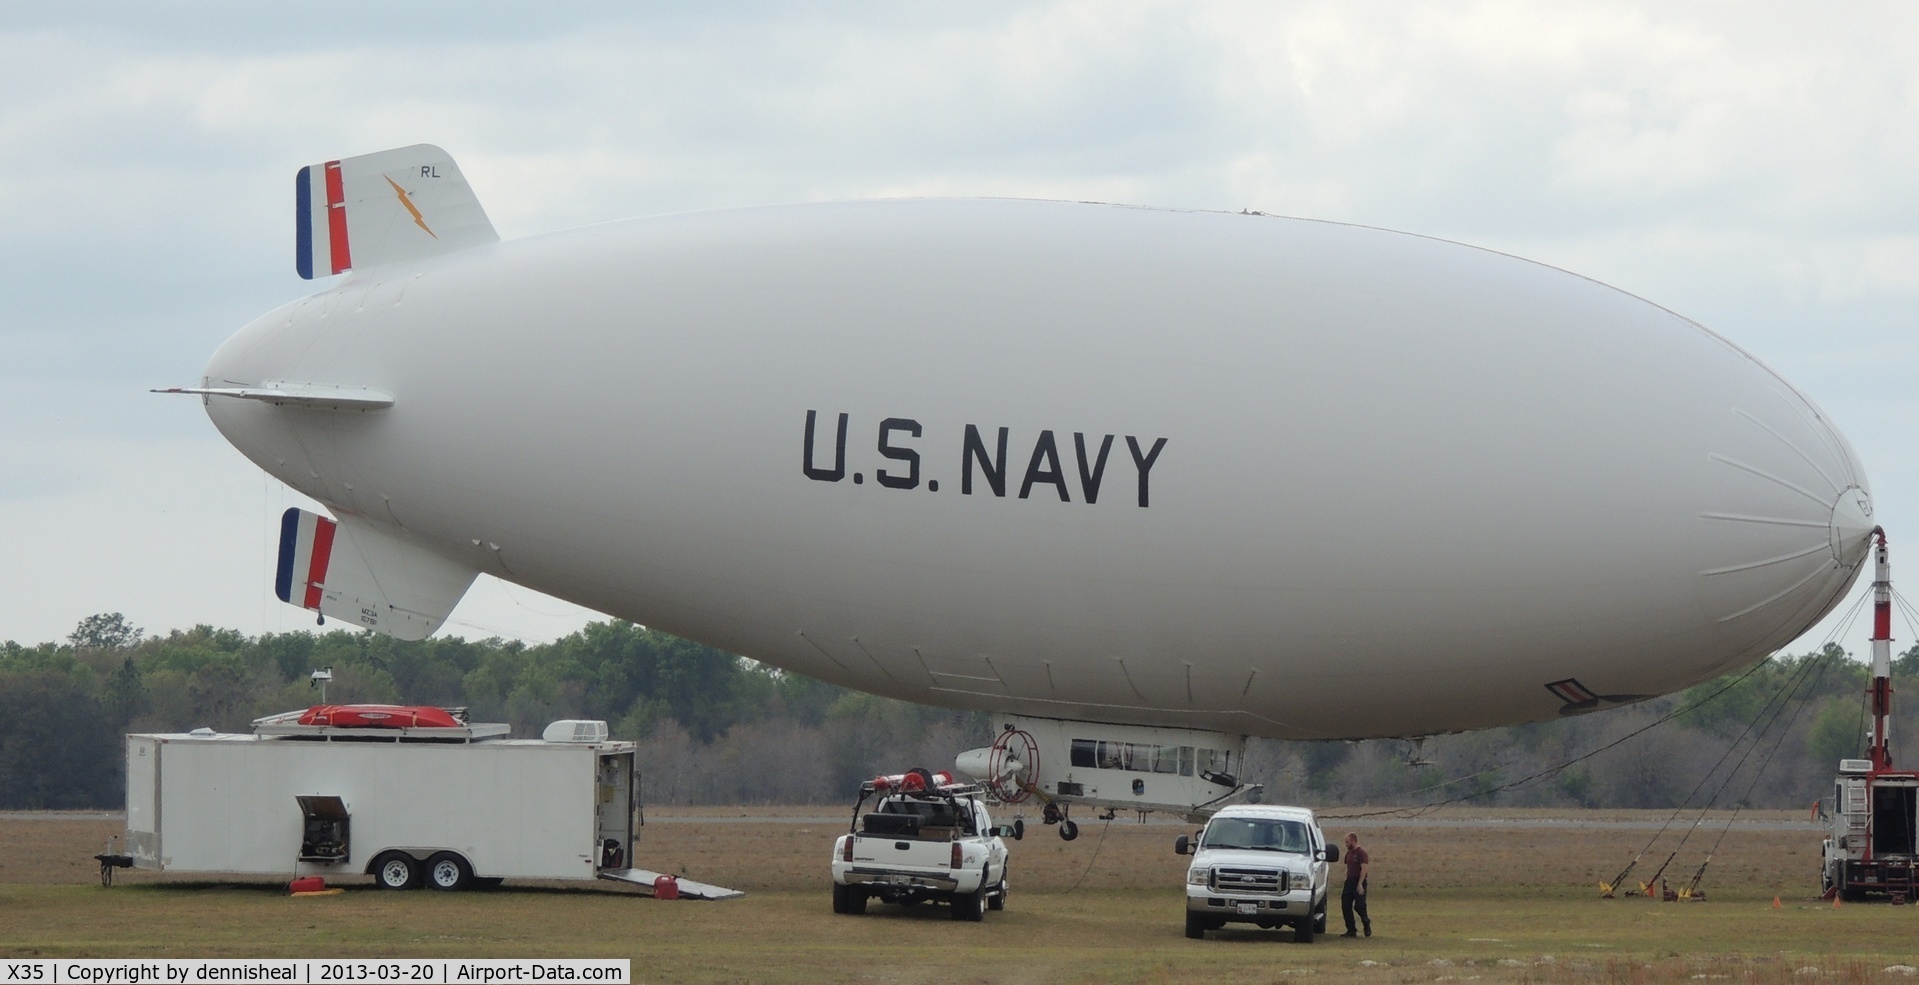 Marion County Airport (X35) - The Navy's only airship winters at the marion county airport.